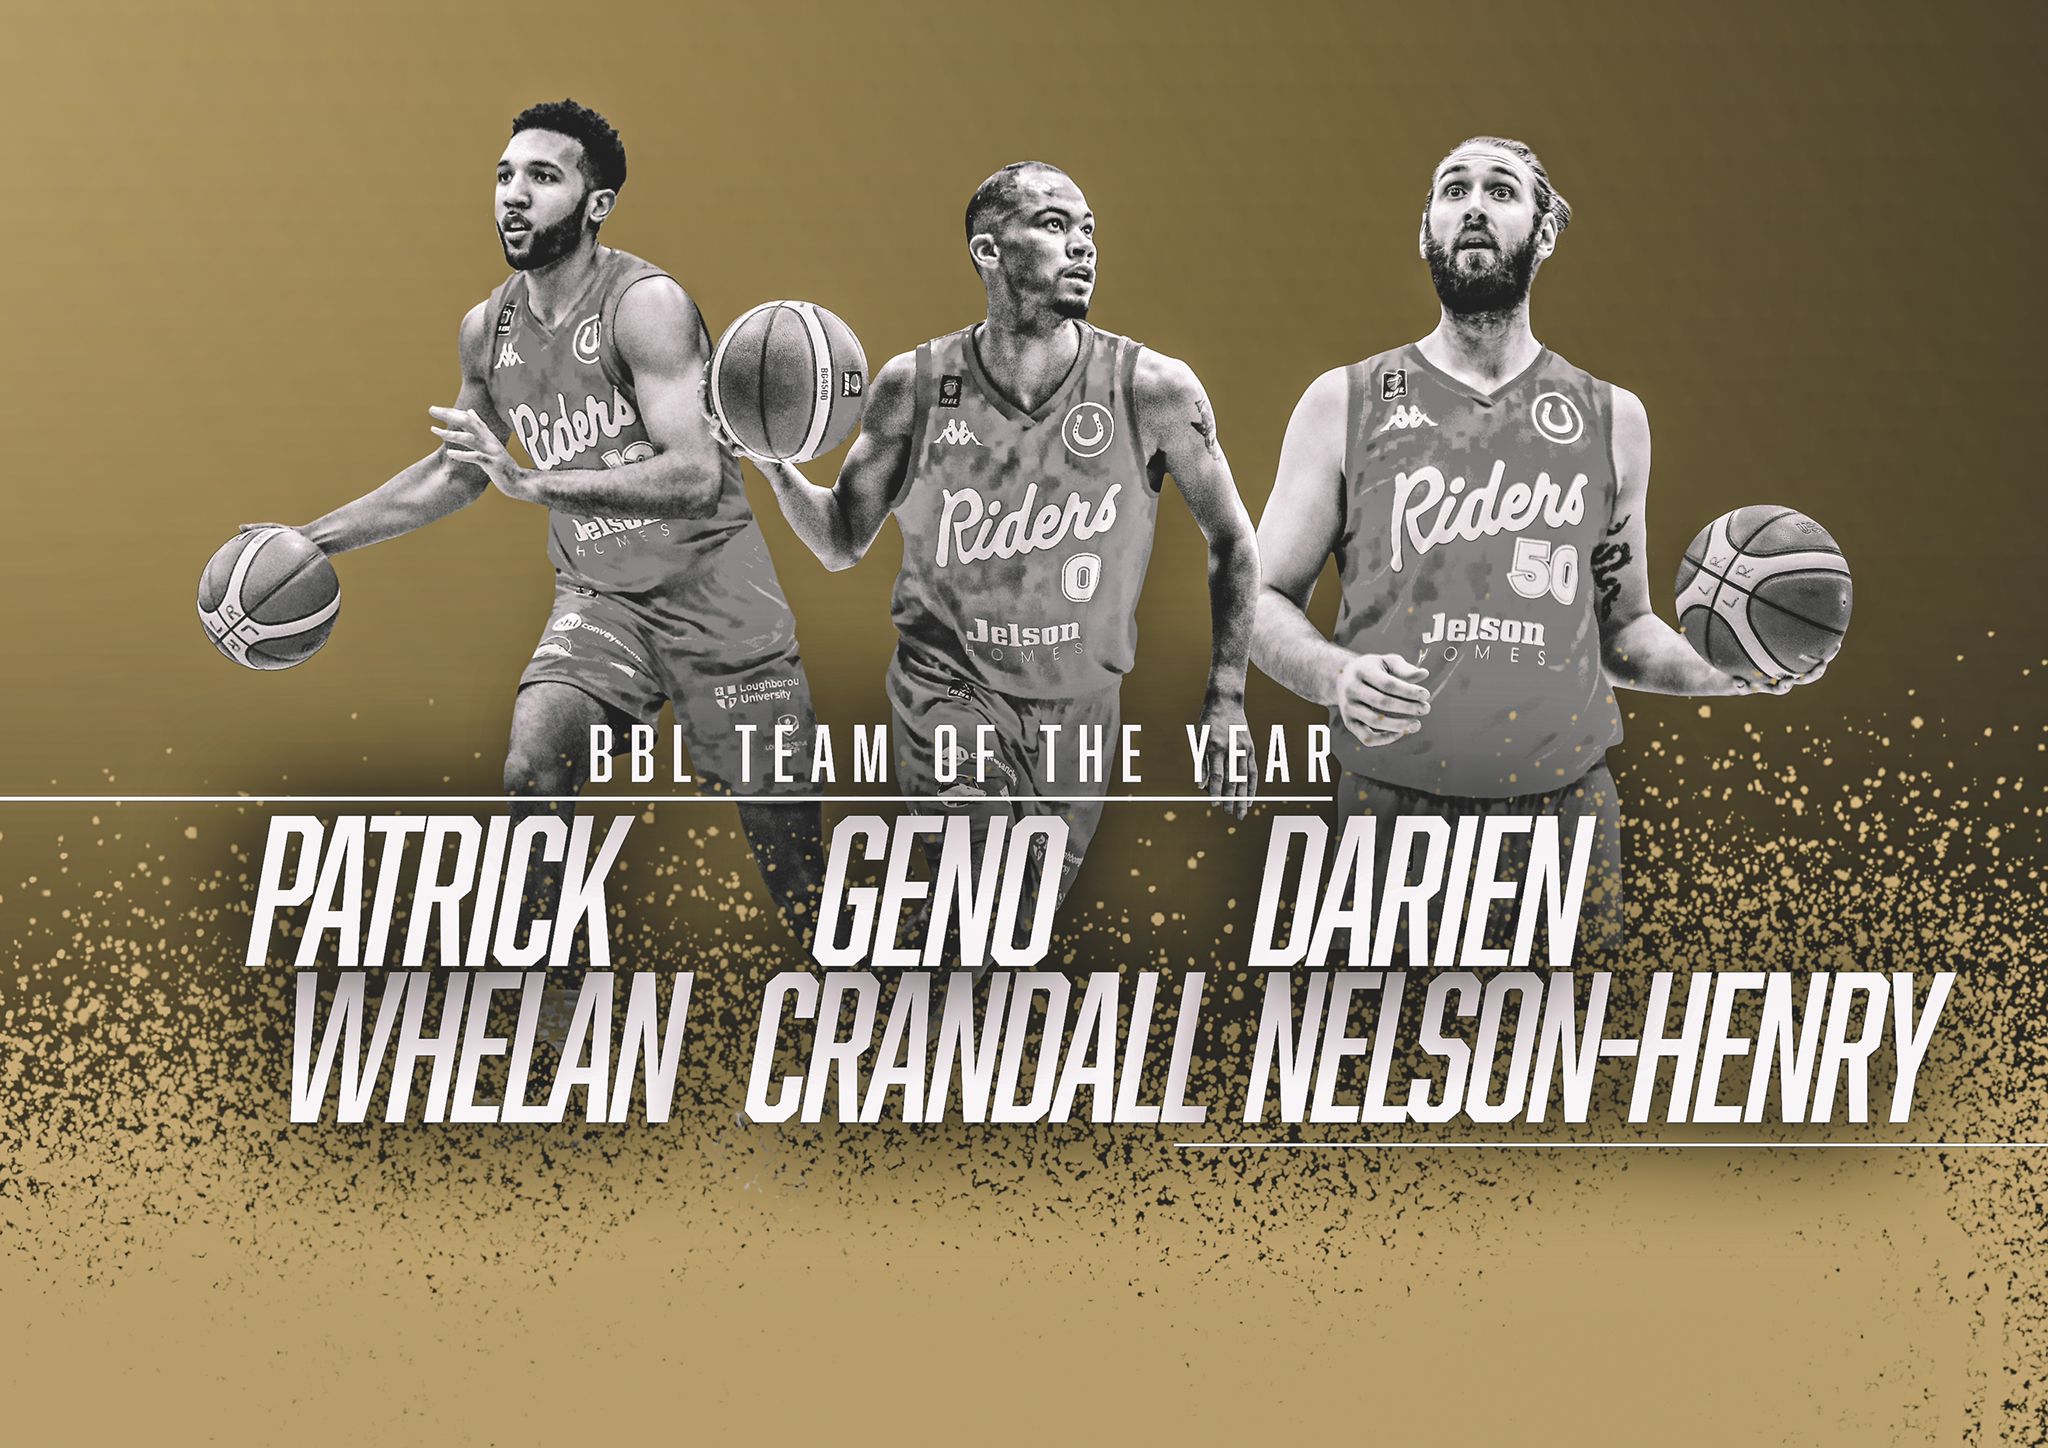 Three Riders named to BBL Team of the Year!